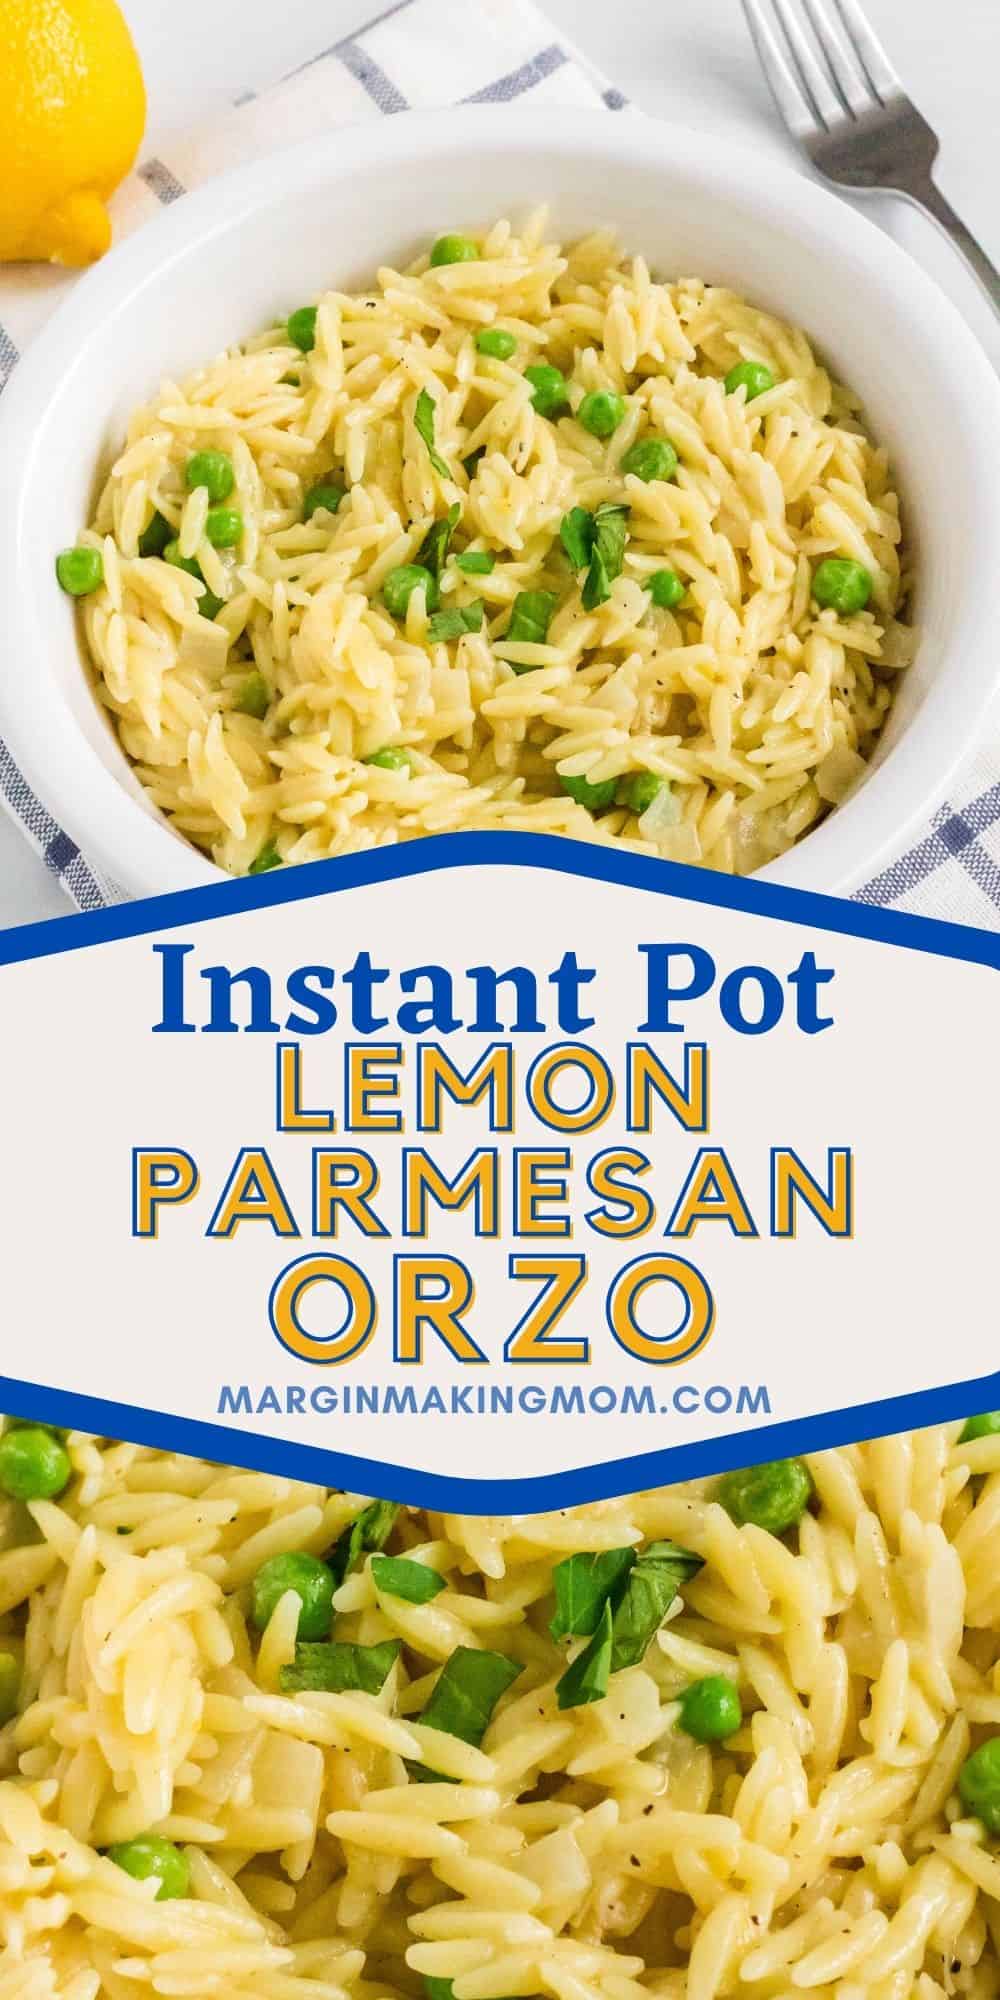 collage image featuring two photos of Instant Pot lemon parmesan orzo. One is an overhead view of the white bowl it's served in, the other is a close-up detail shot of the orzo with peas and herbs.